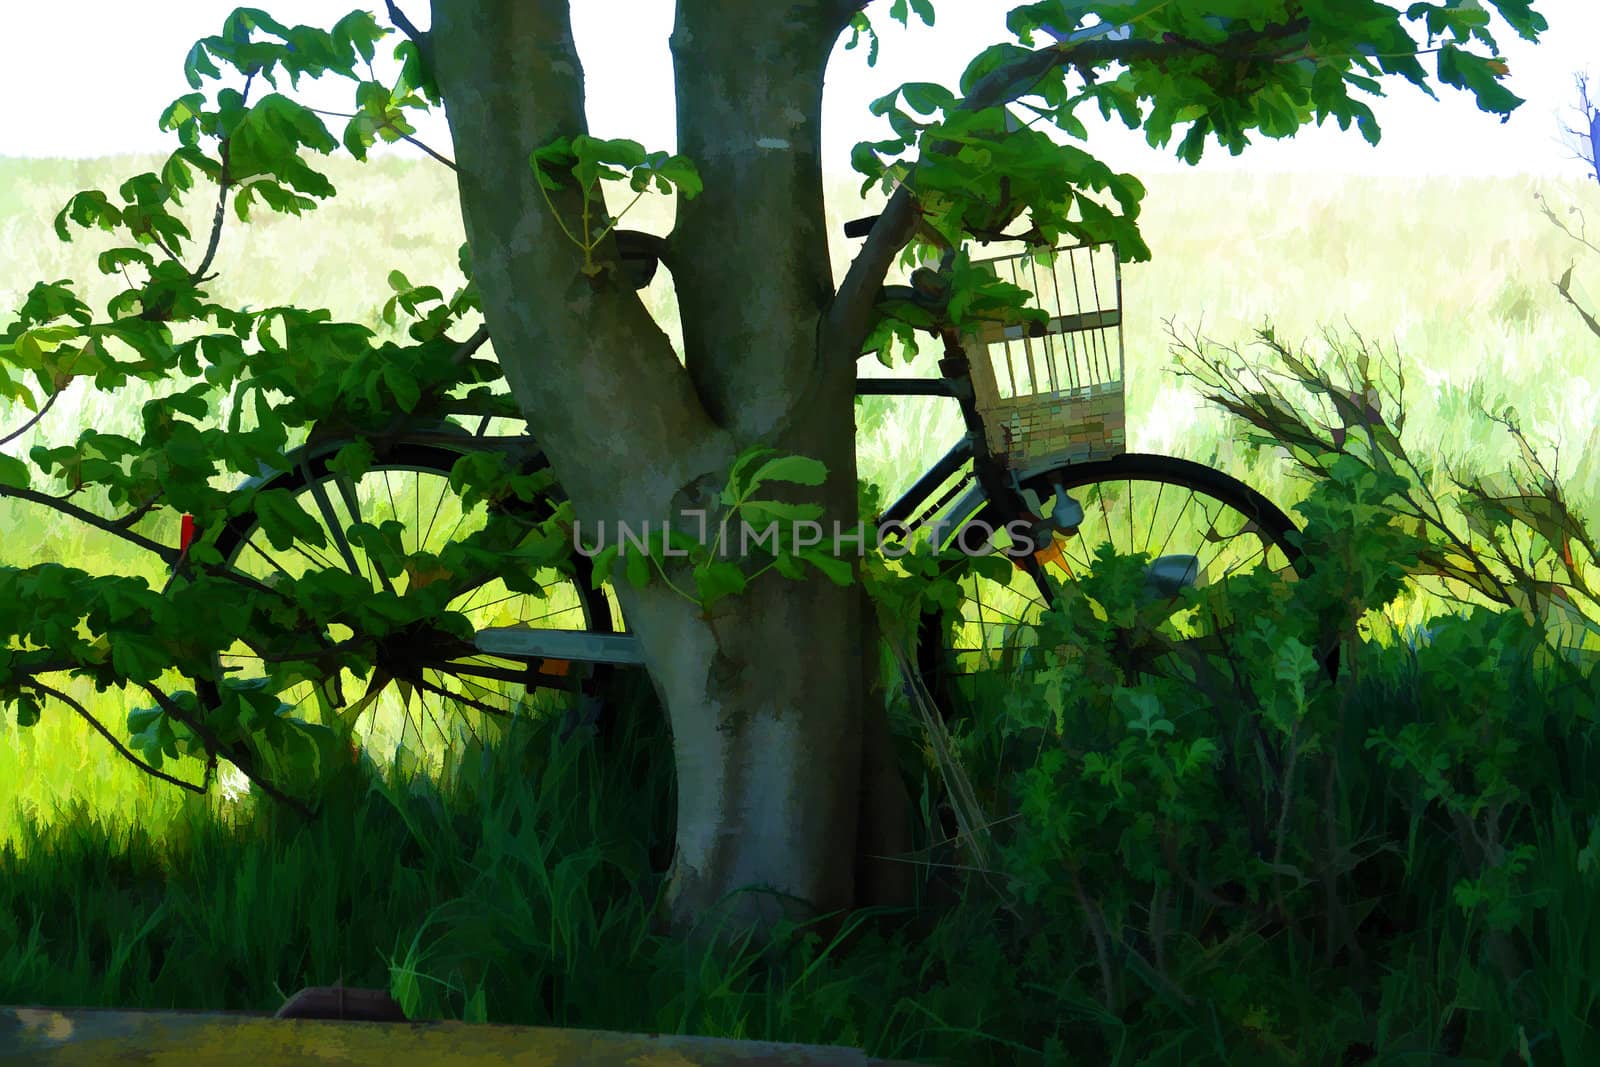 Vintage classical Bicycle against a tree digital art by Ronyzmbow